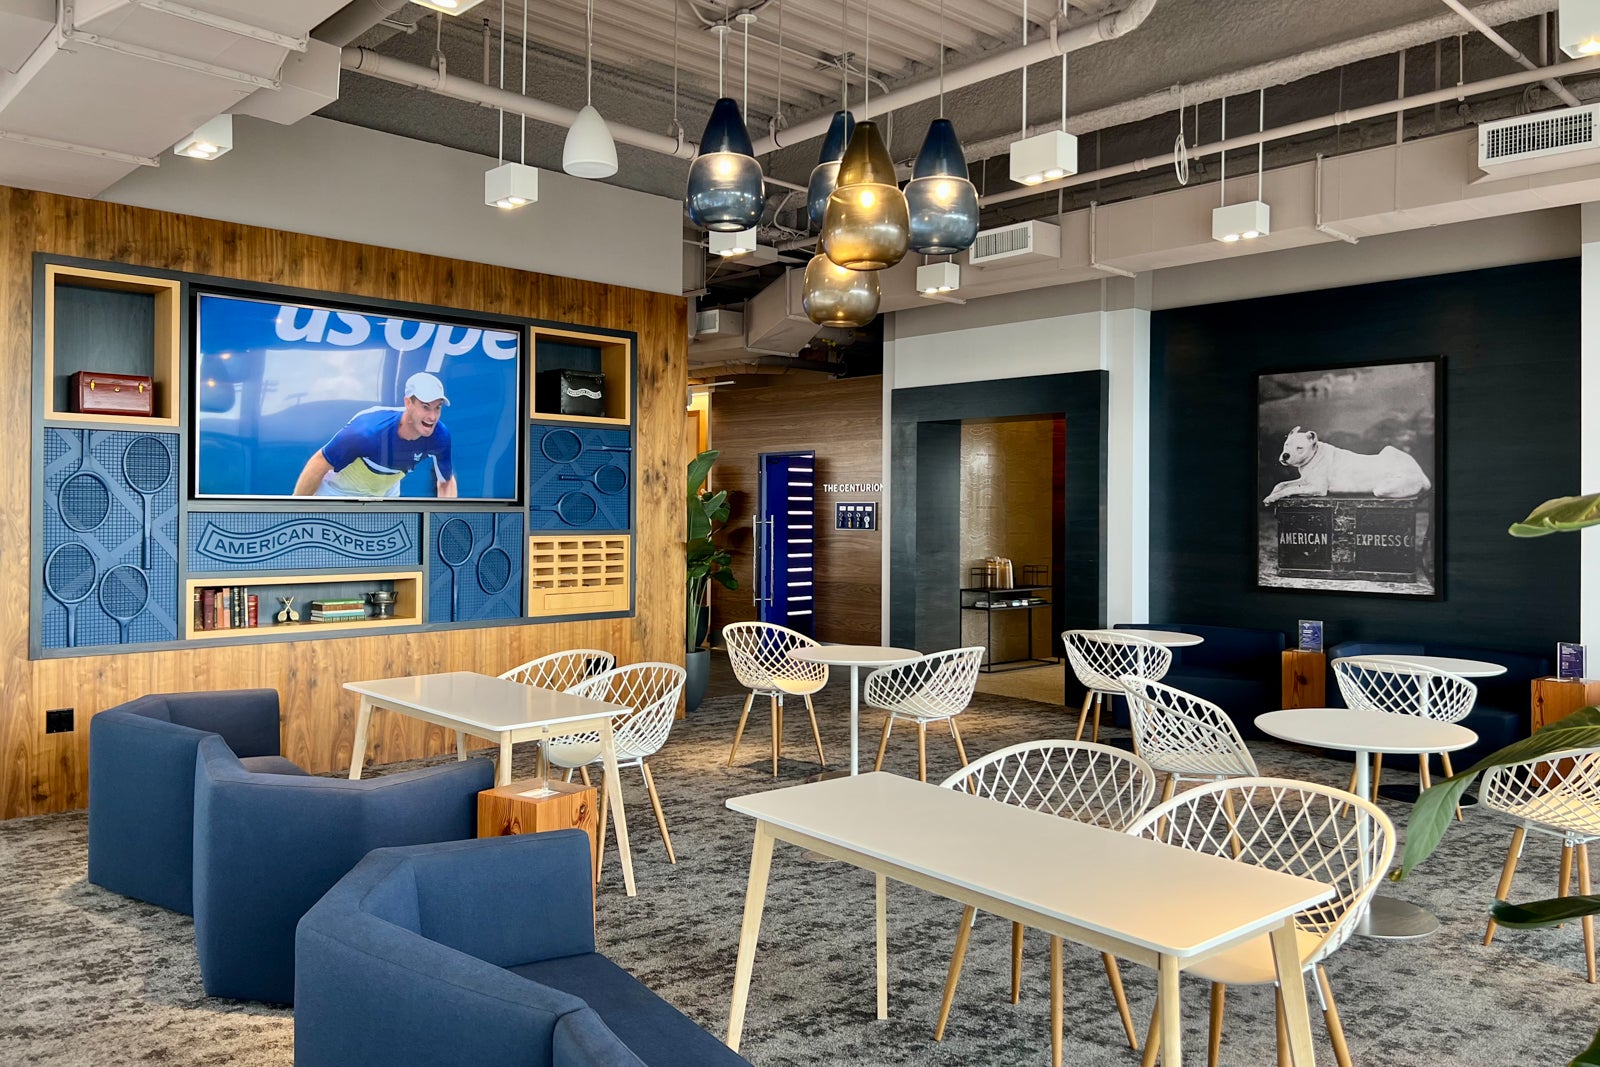 Amex Platinum cardholders can reserve US Open Tennis Championships Centurion lounge space today